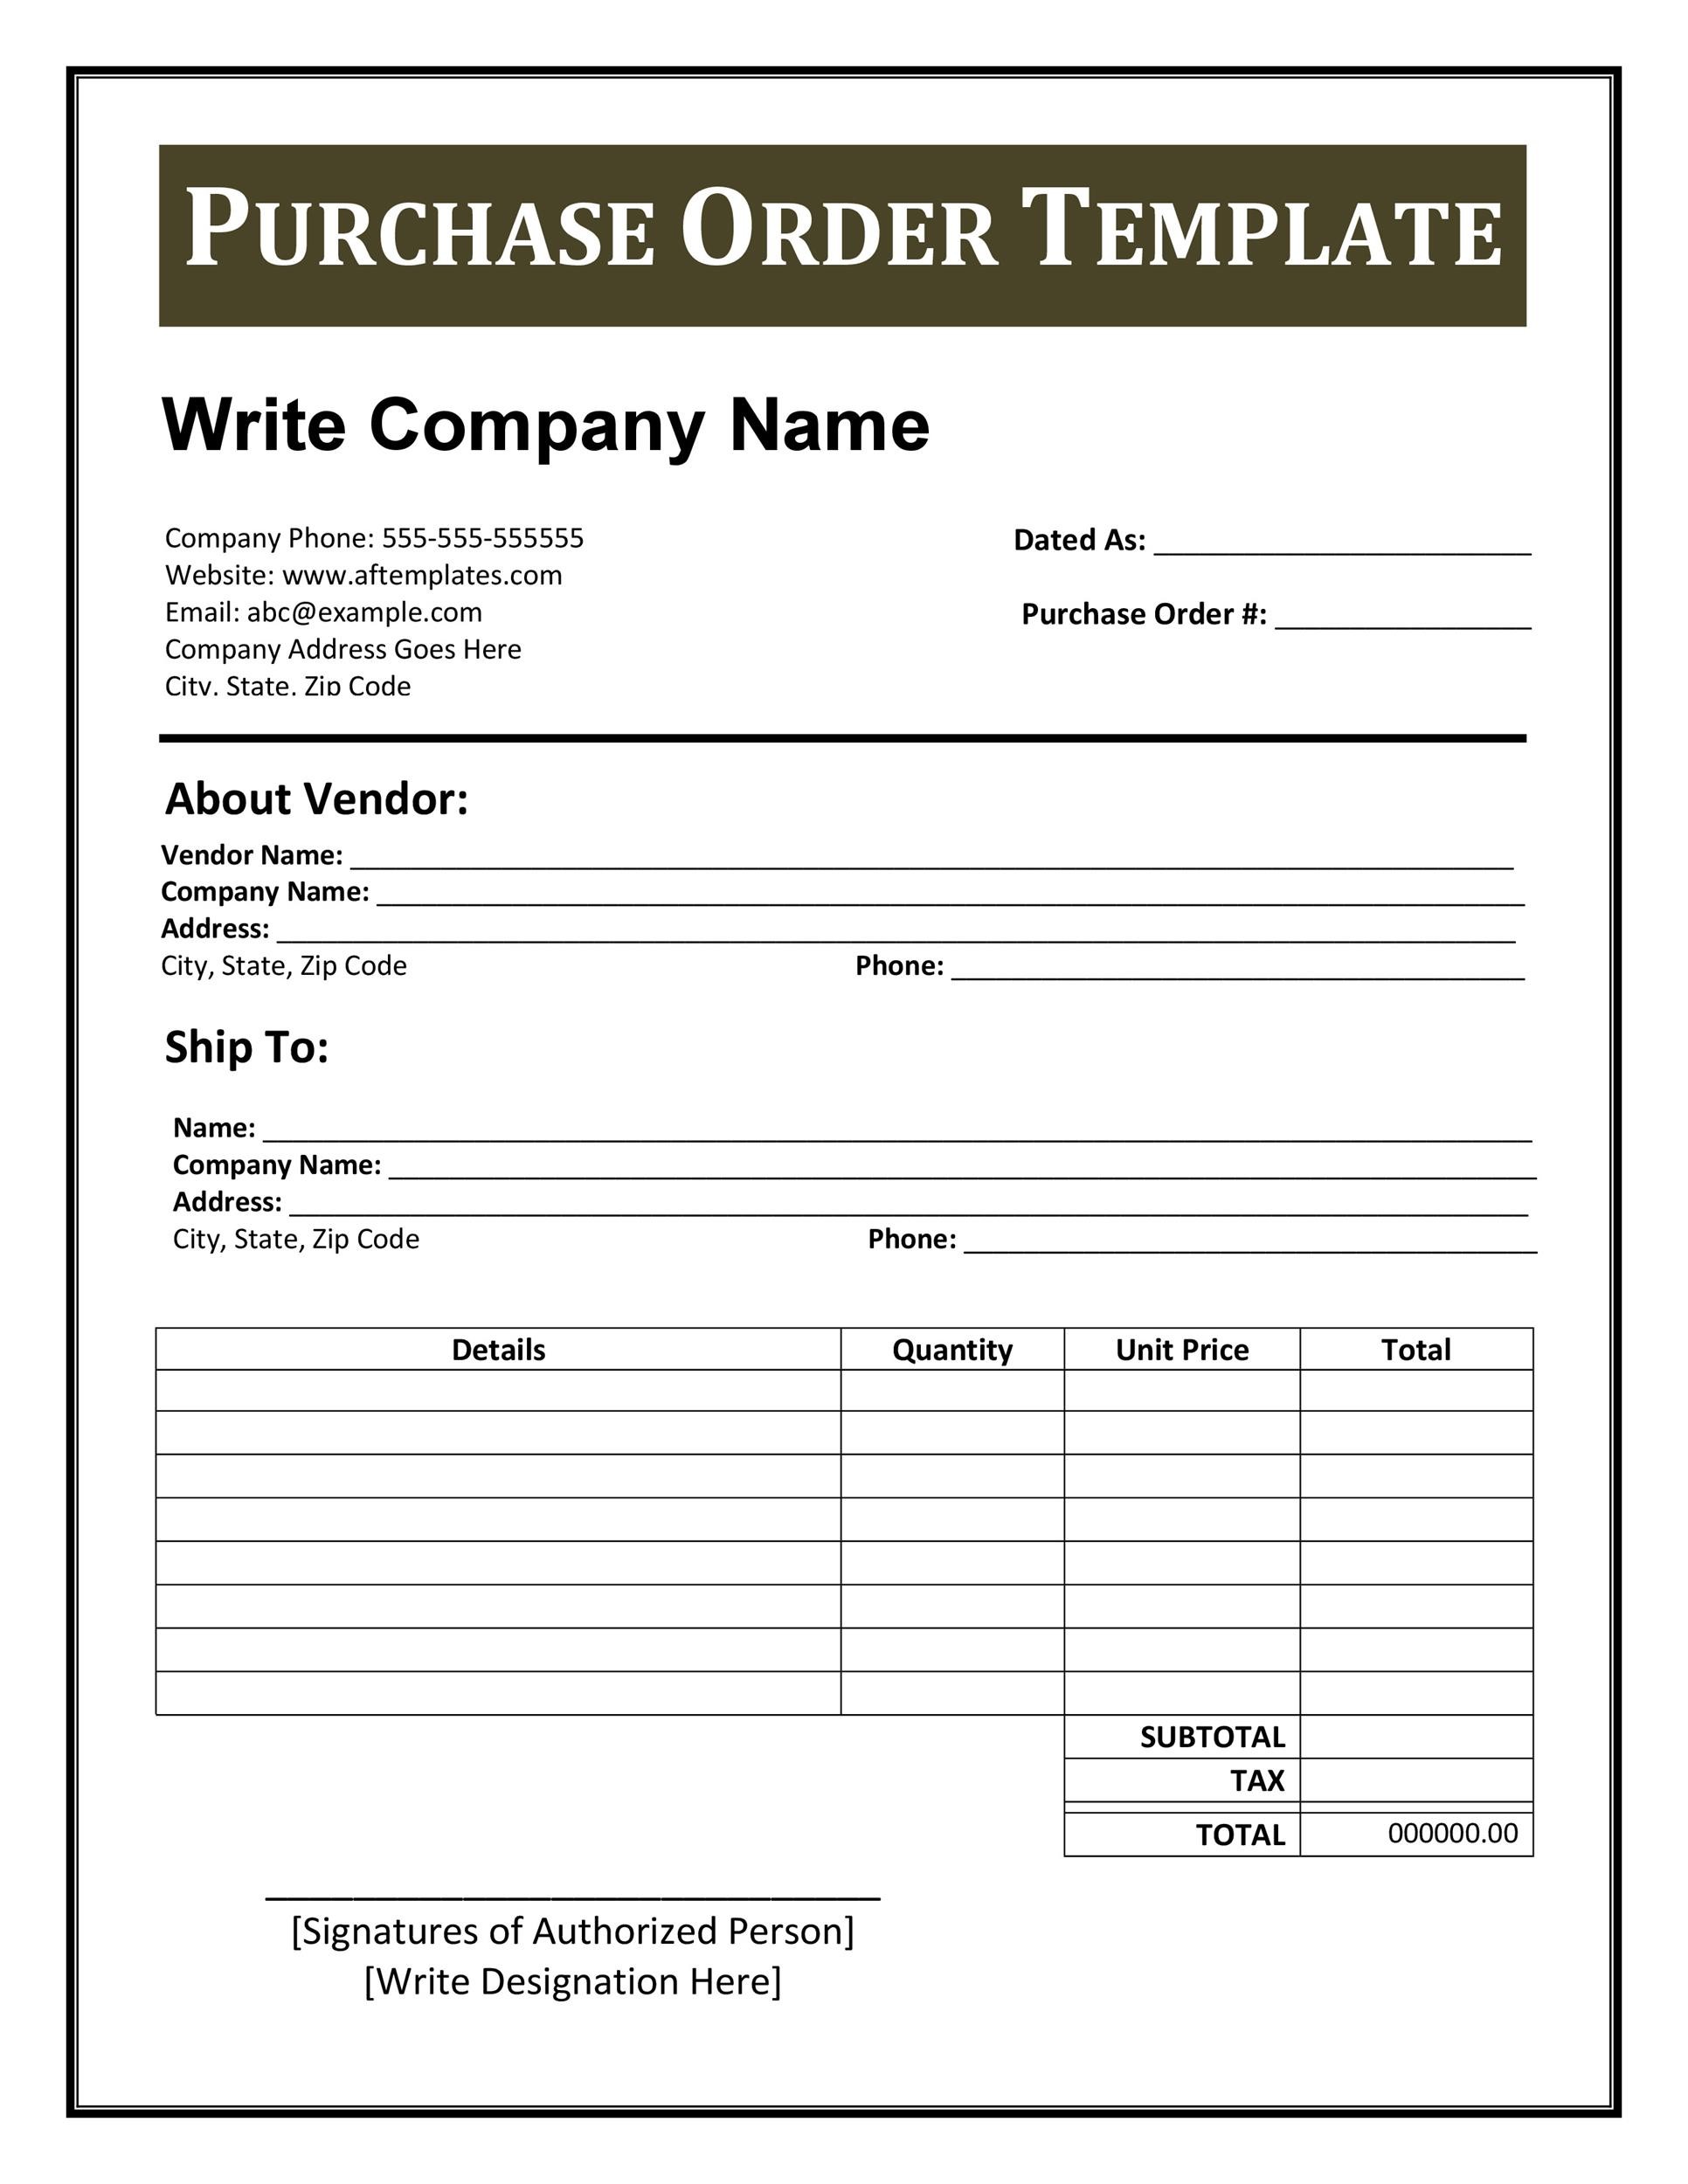 43 Free Purchase Order Templates In Word Excel Pdf Access purchase order template free